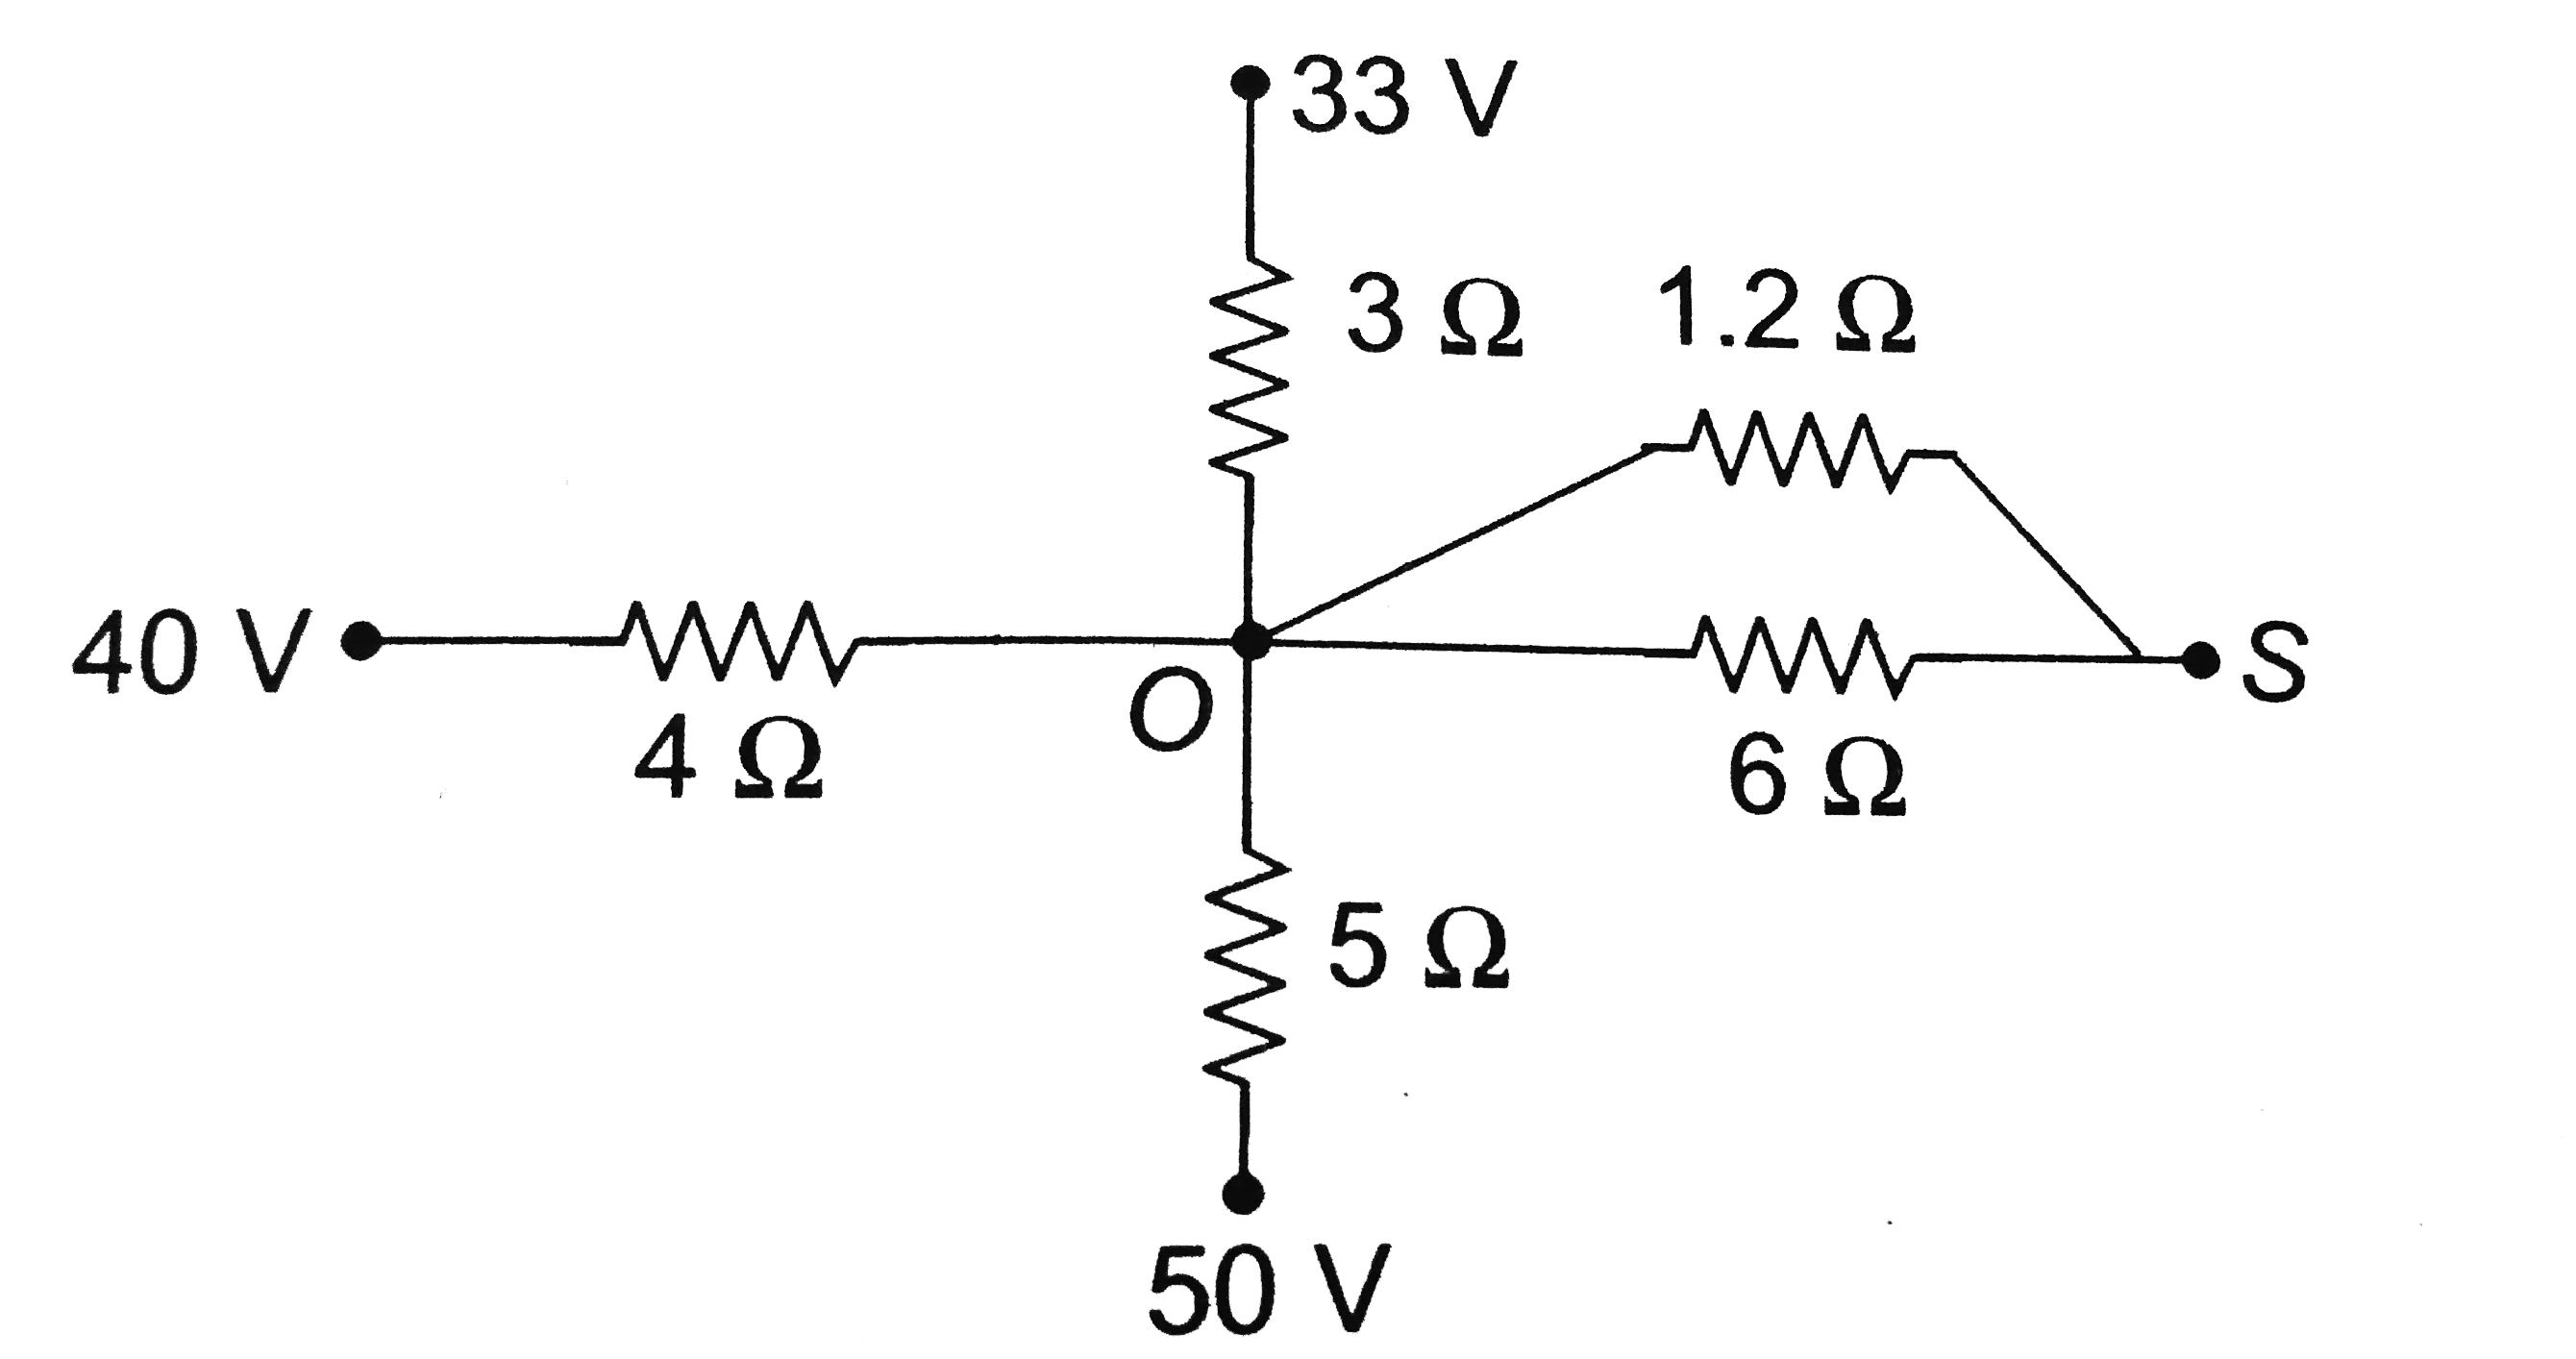 In the given network, the potential at point O is (Given VO = V(s) = 18 V)